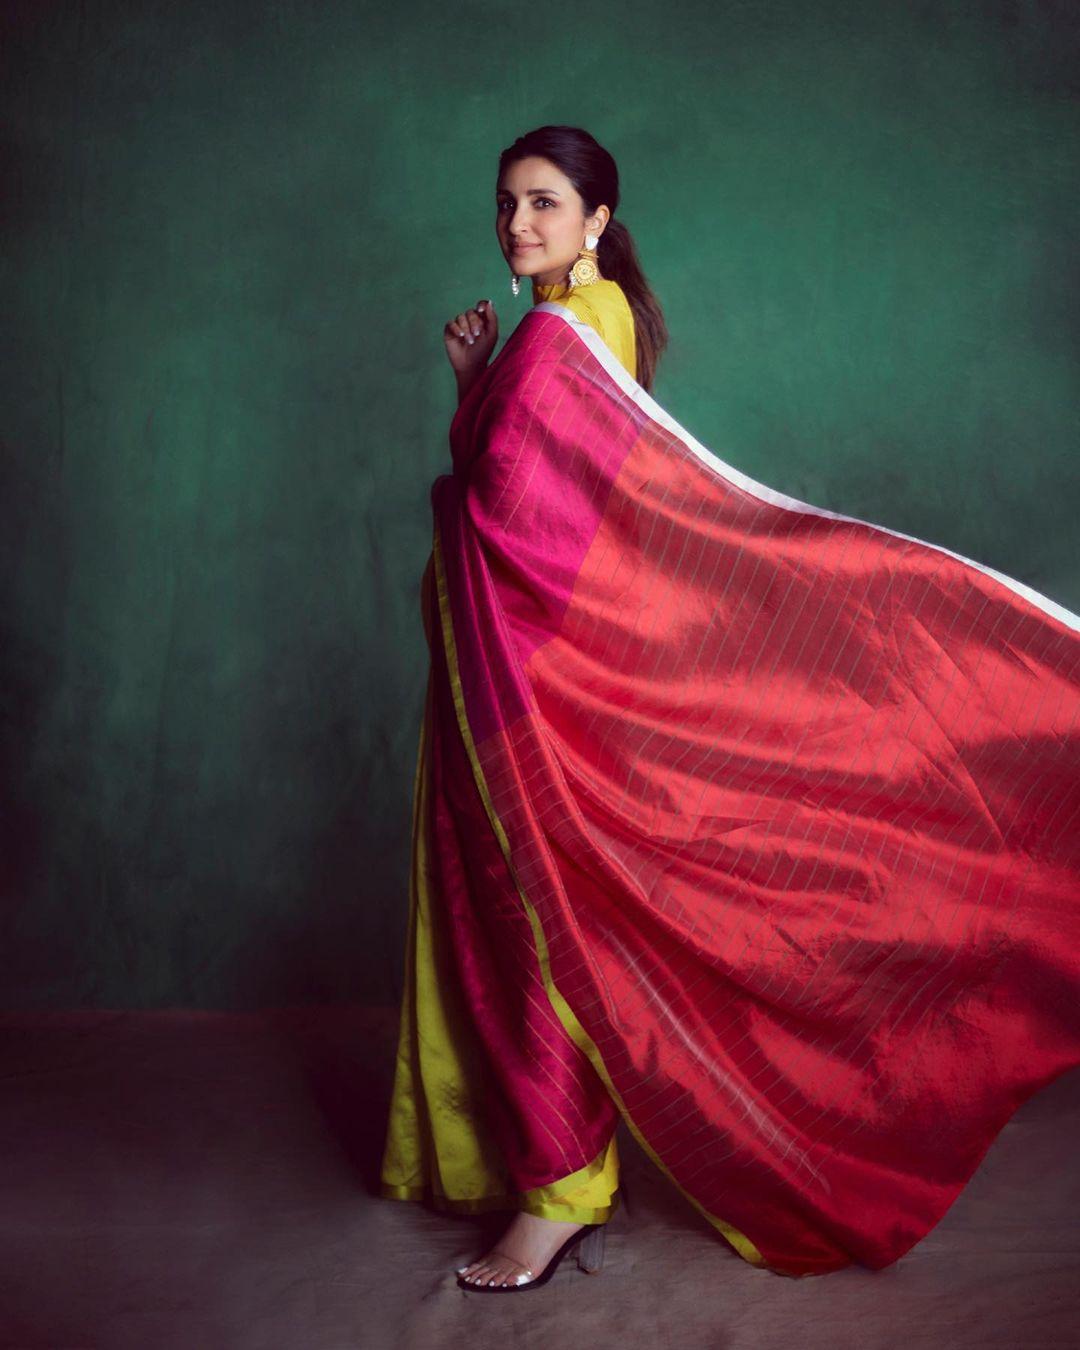 Parineeti Chopra's pink and yellow saree is all you need if you are searching for a simple yet stylish wedding look